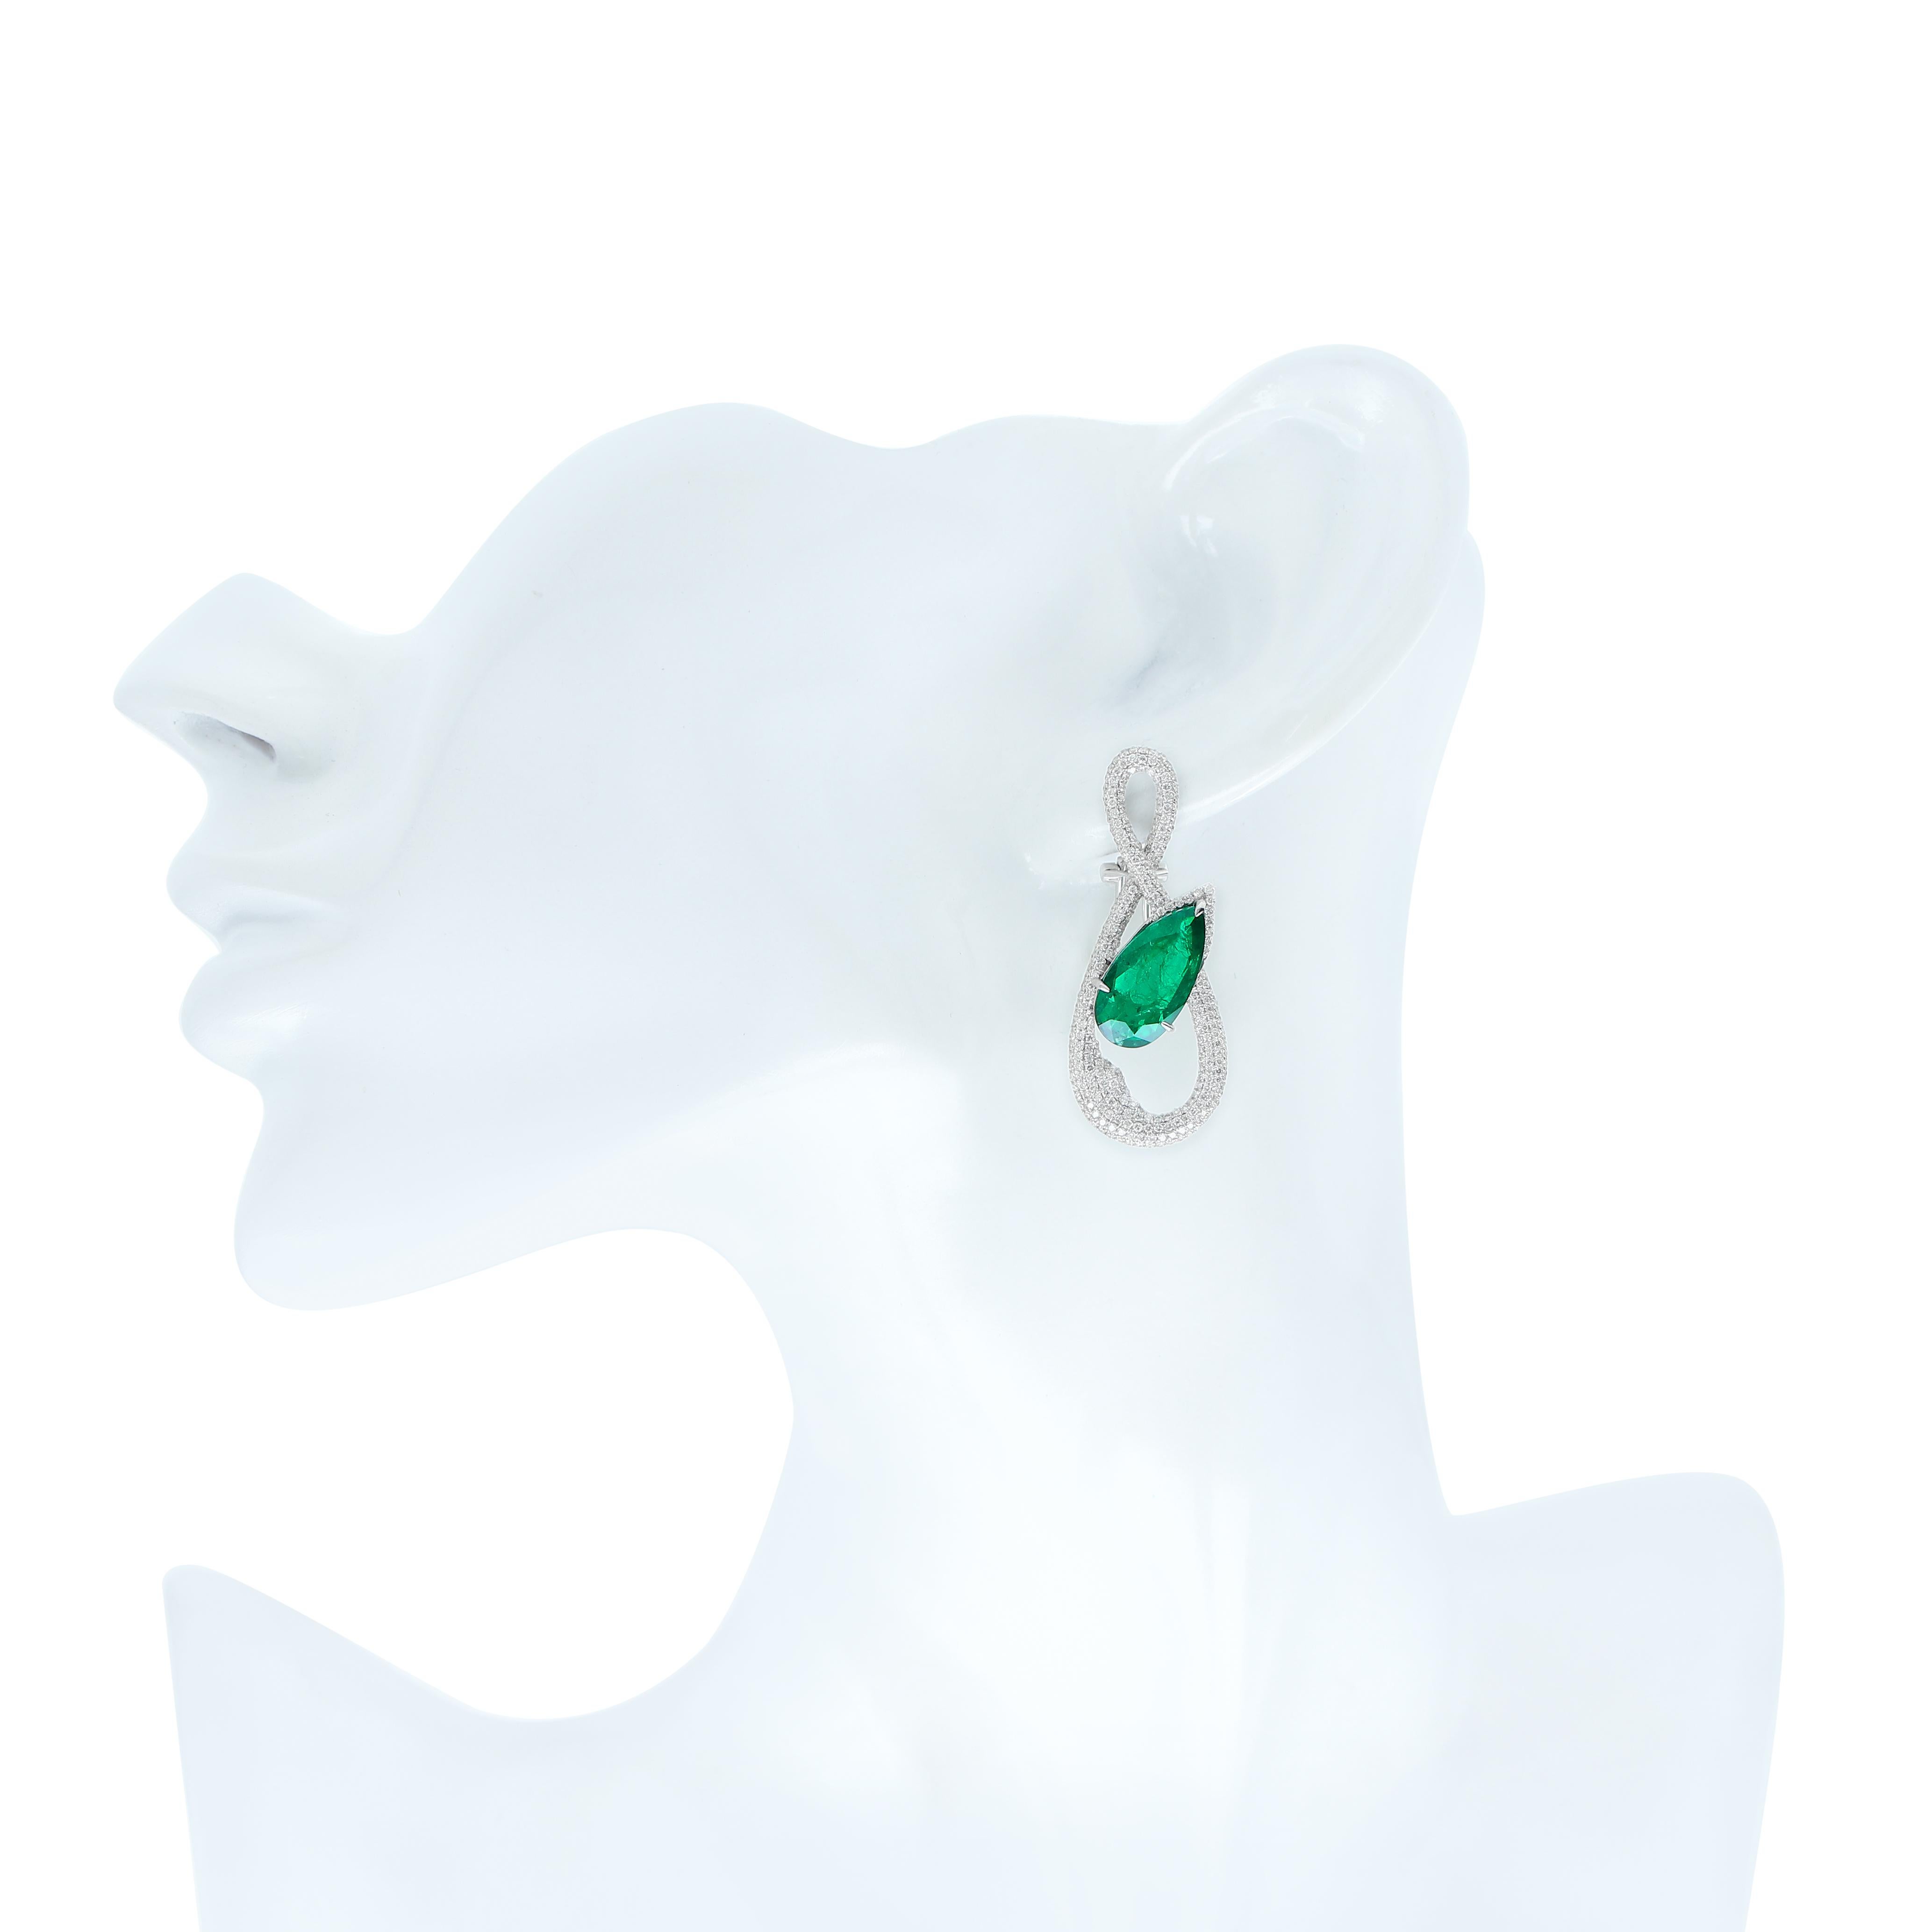  7.56Cts Emerald & Diamond Earring in 18k White Gold for Charismas Gift Earring  For Sale 1